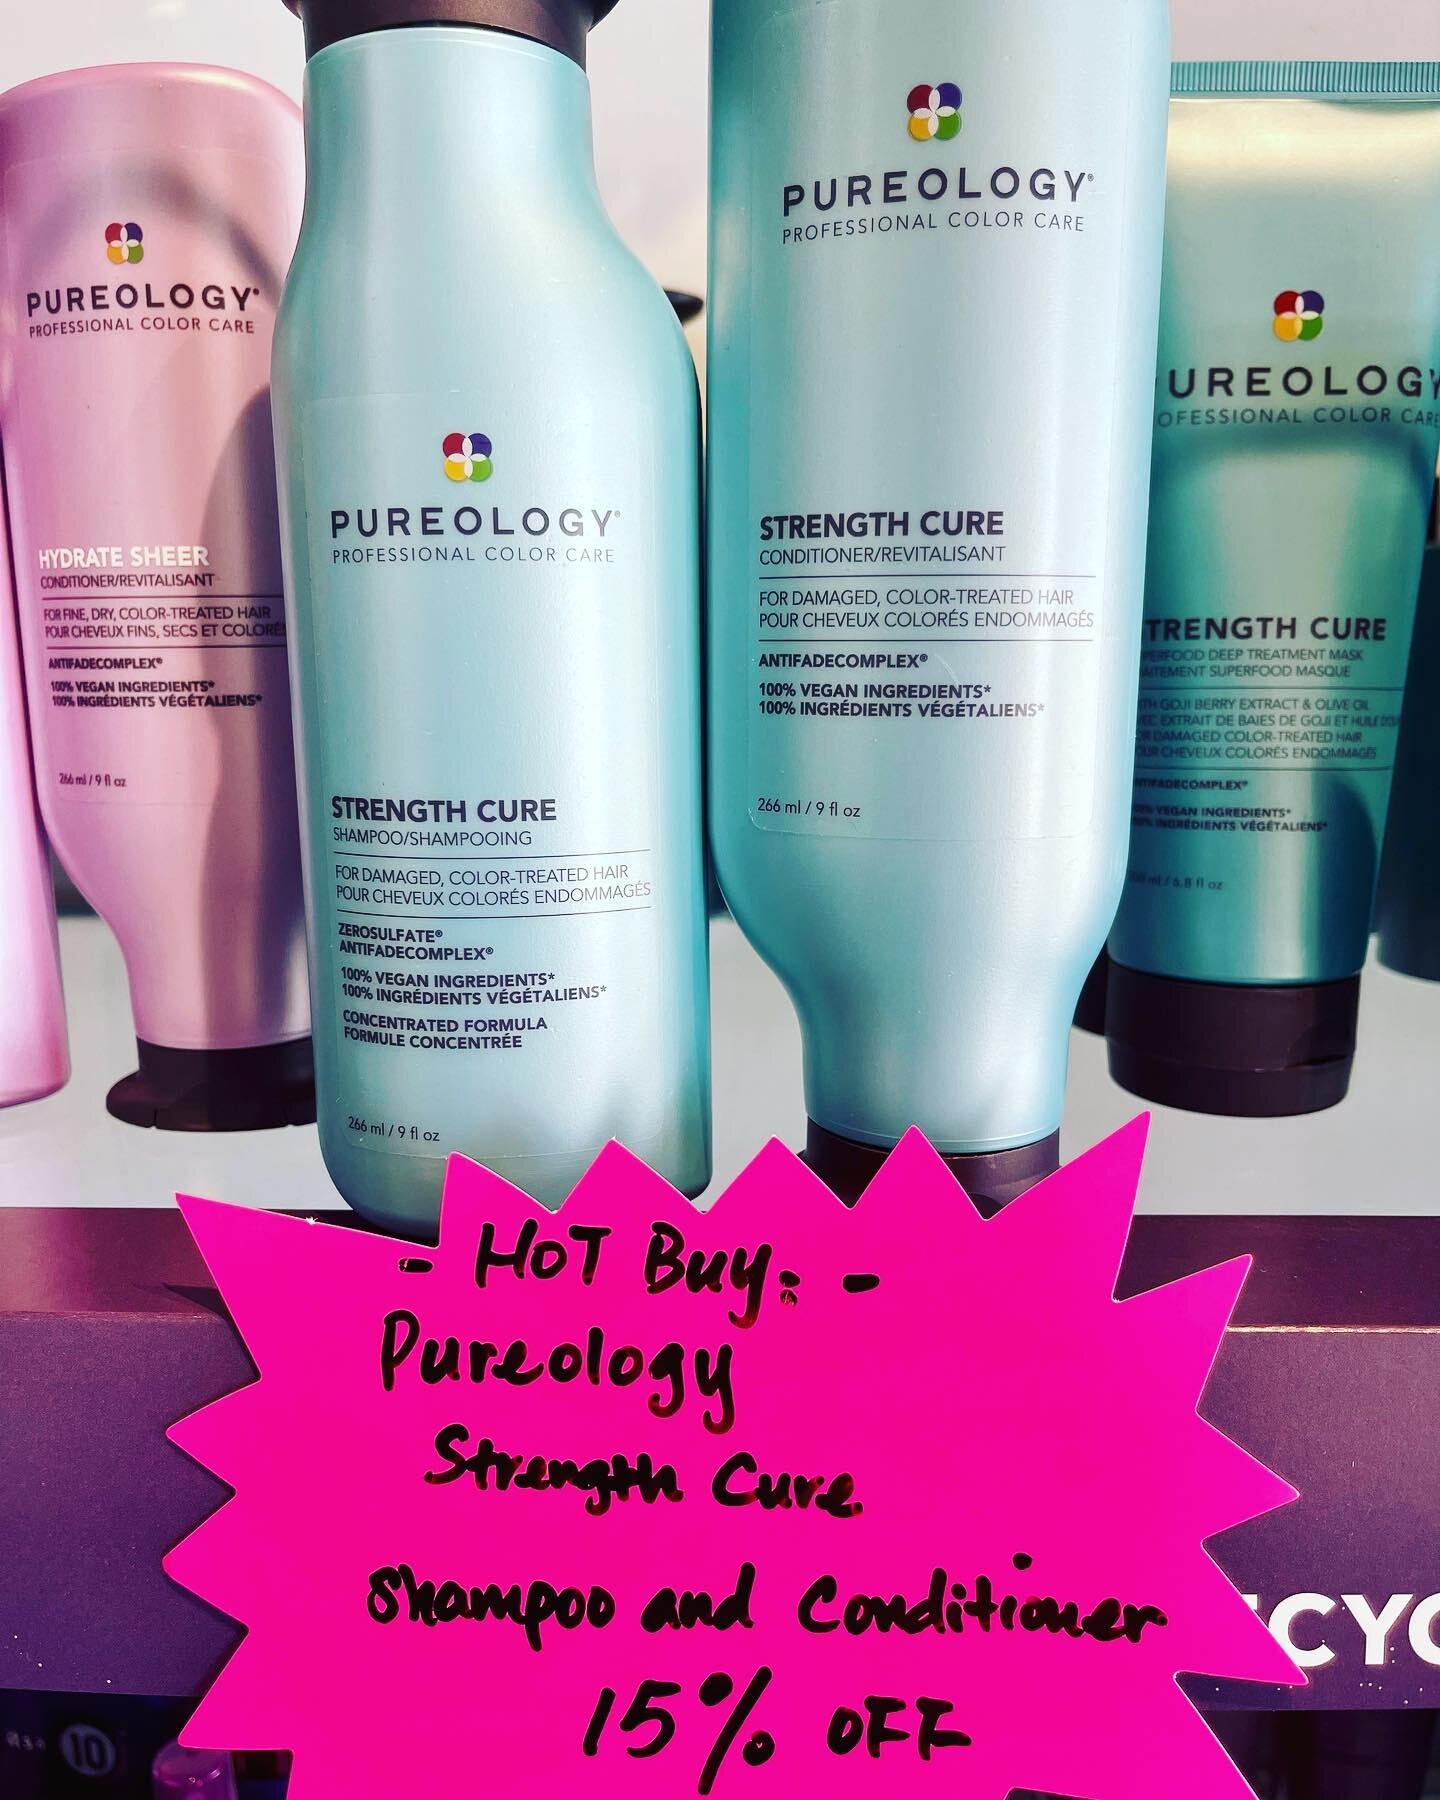 Want stronger, healthier hair for summer? Get 15% off when you buy Pureology Strength Cure shampoo and conditioner together.